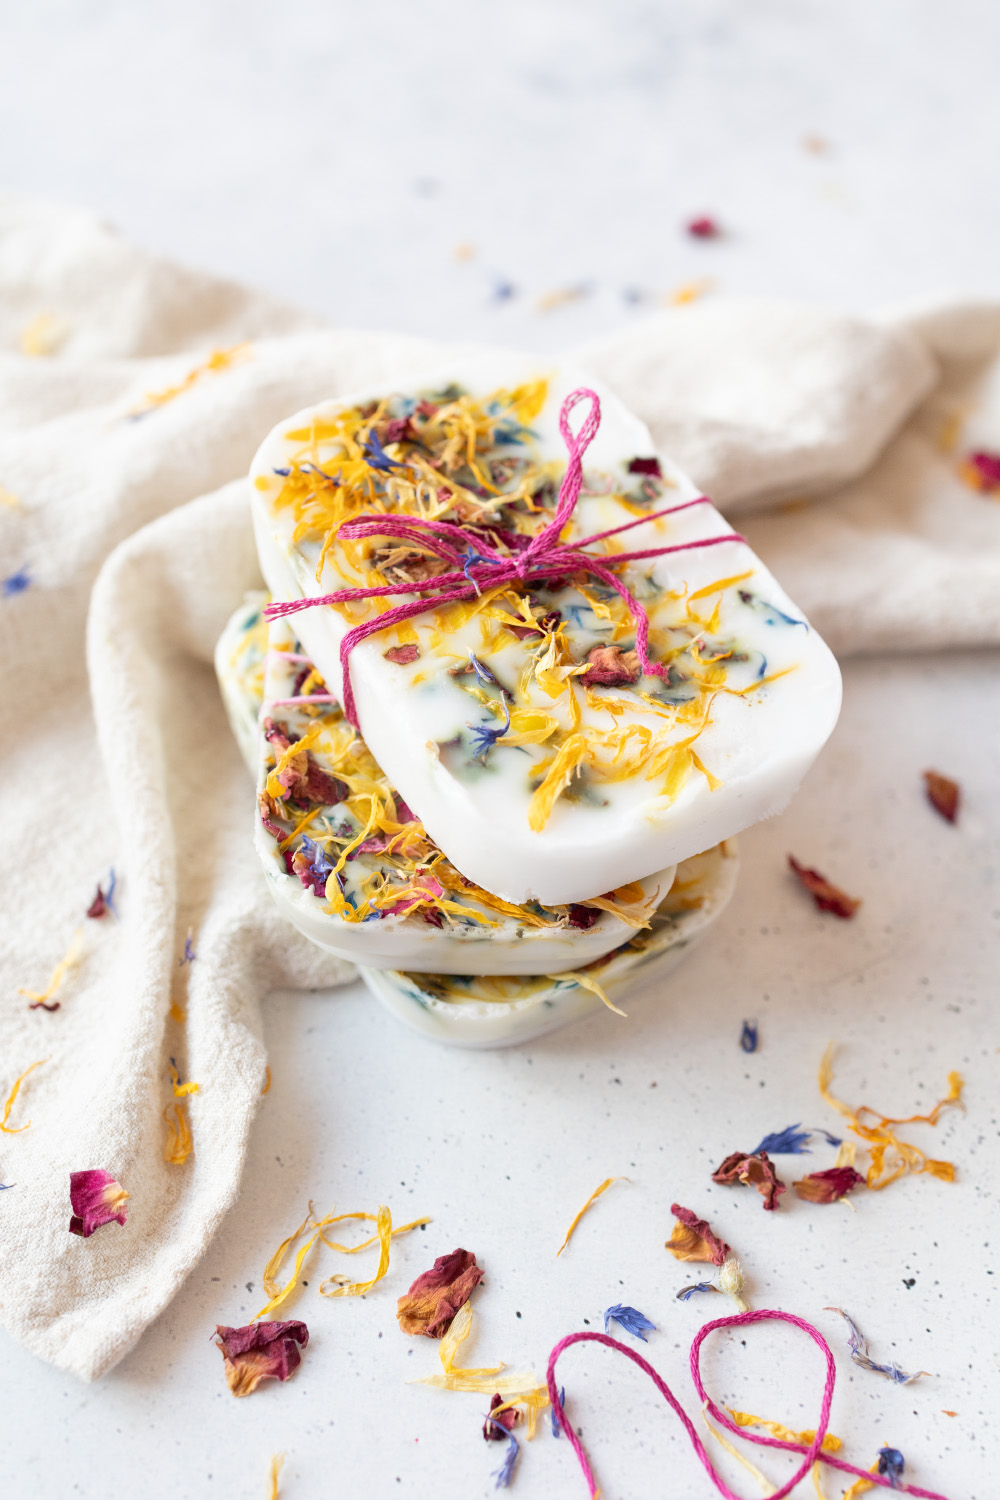 Make DIY soap with flowers